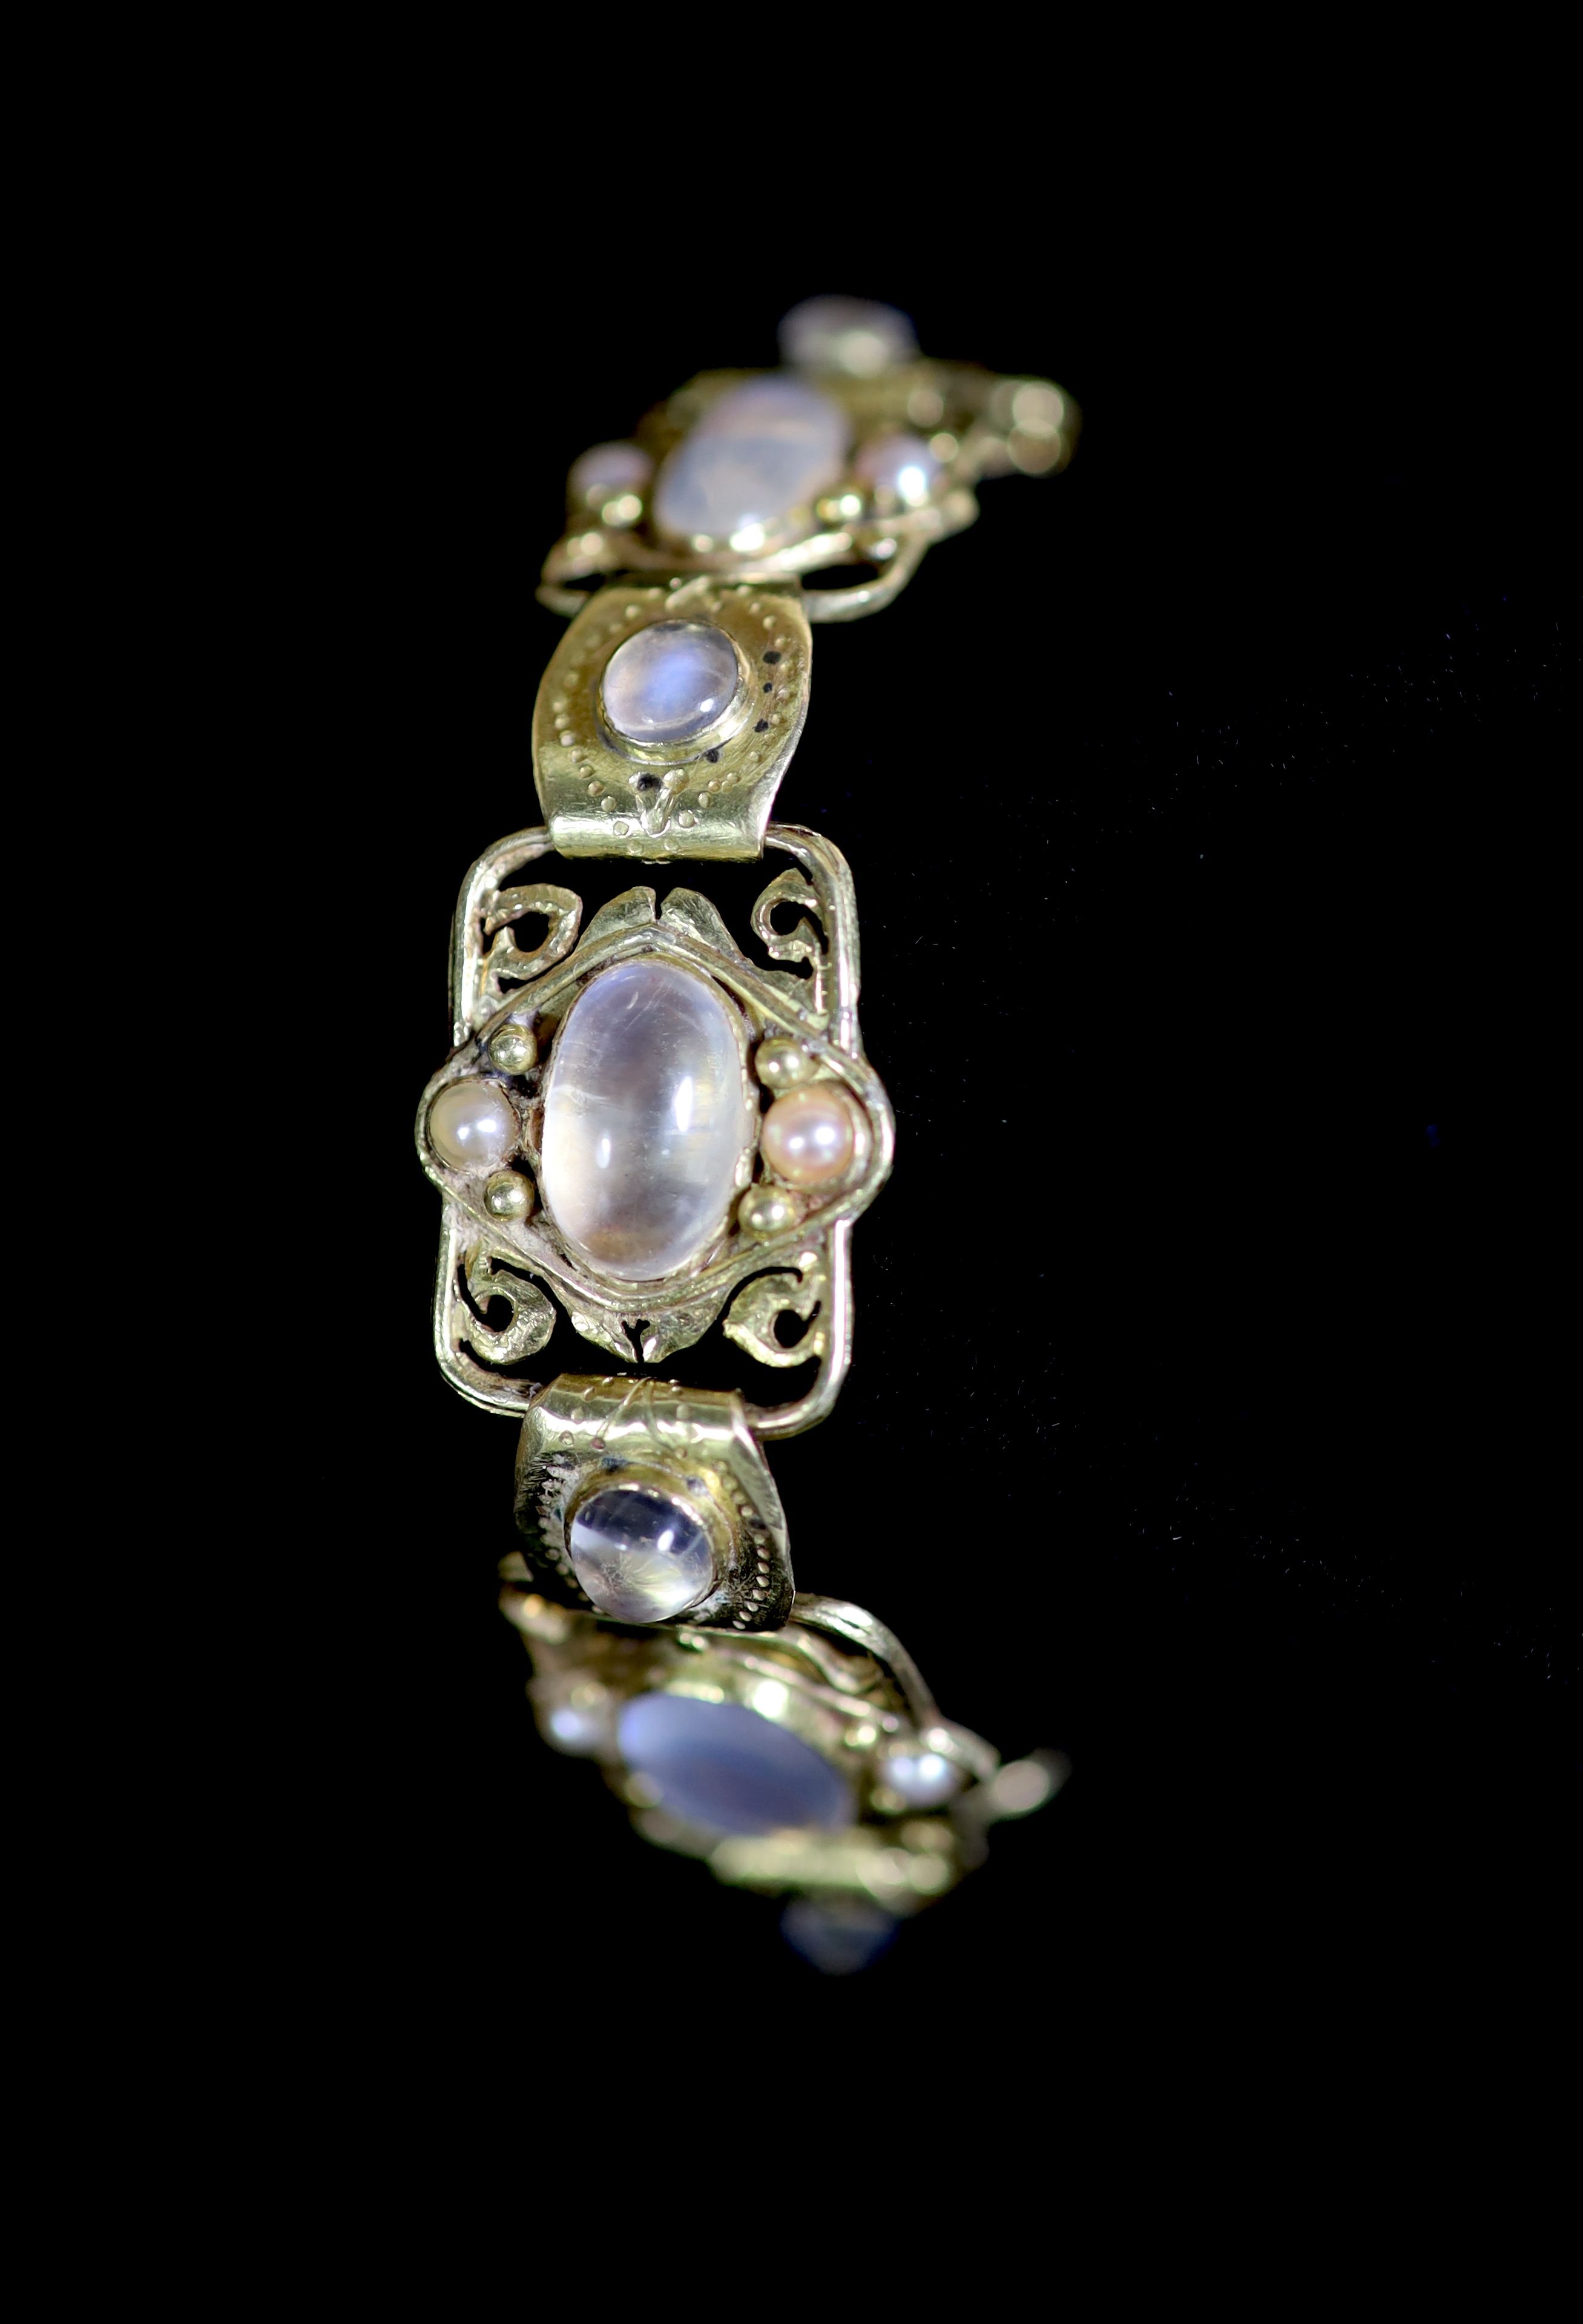 An early 20th century Arts & Crafts gold, cabochon moonstone and split pearl set bracelet